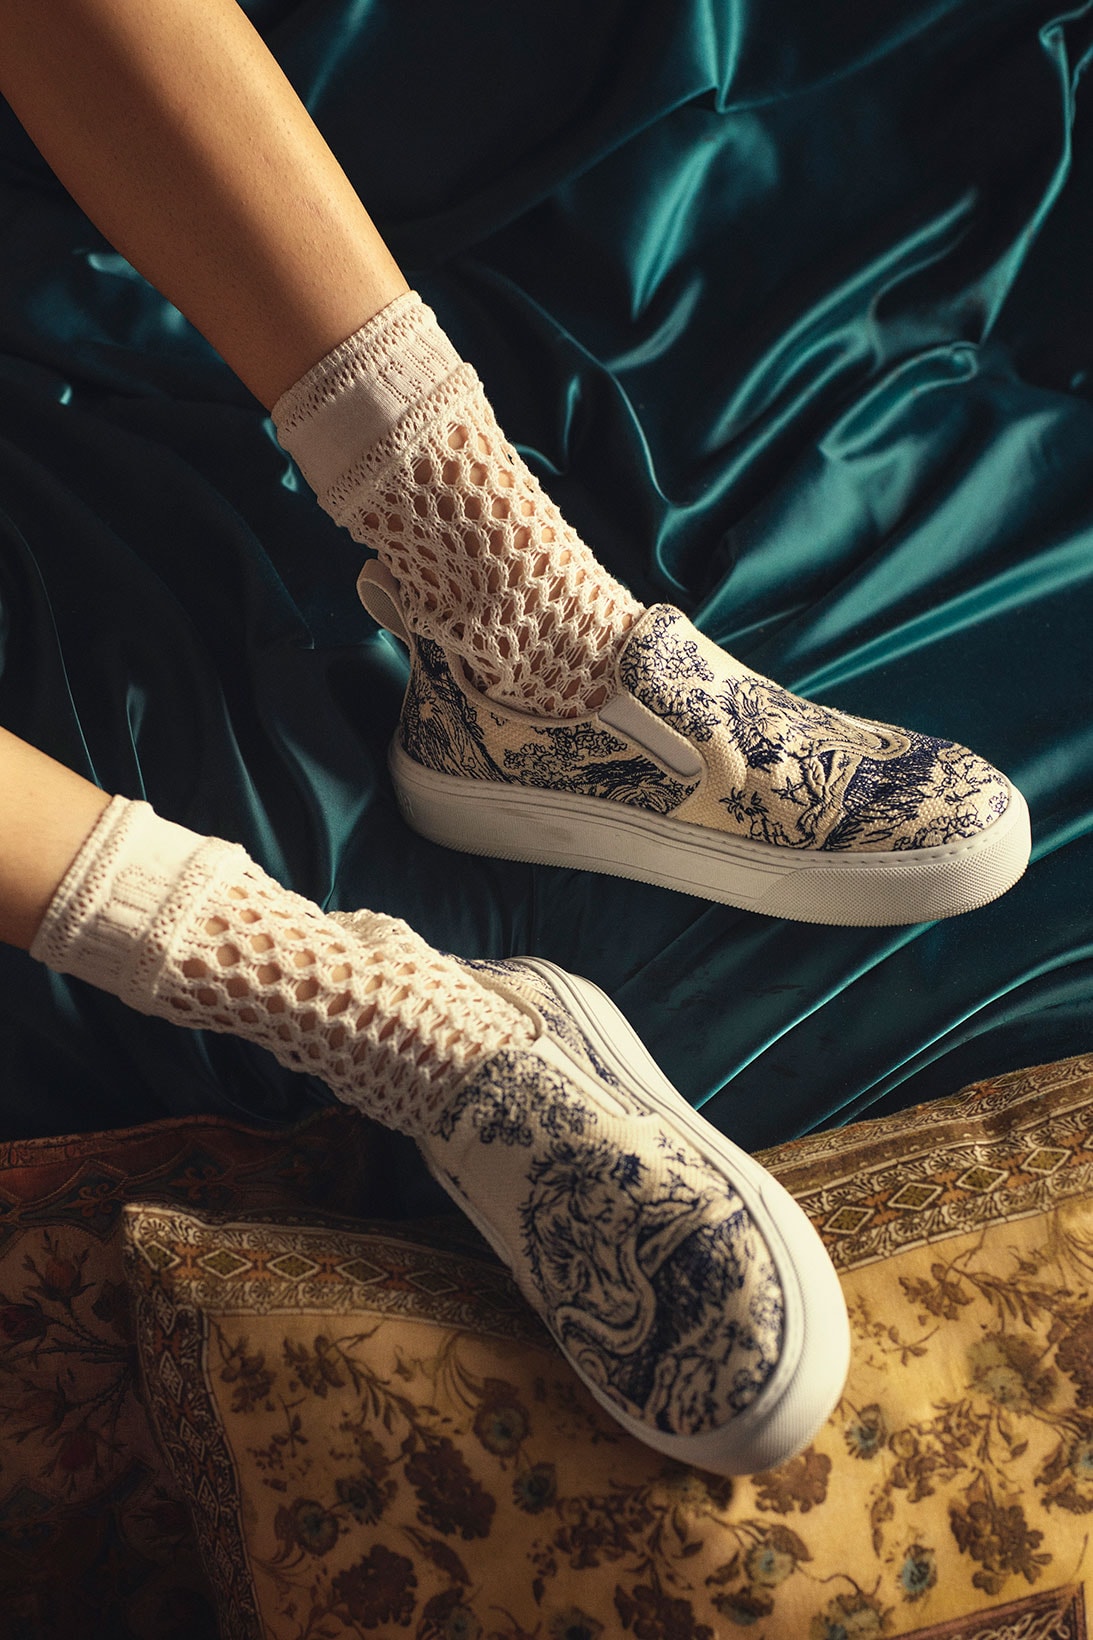 dior chez moi loungewear spring summer collection sneakers